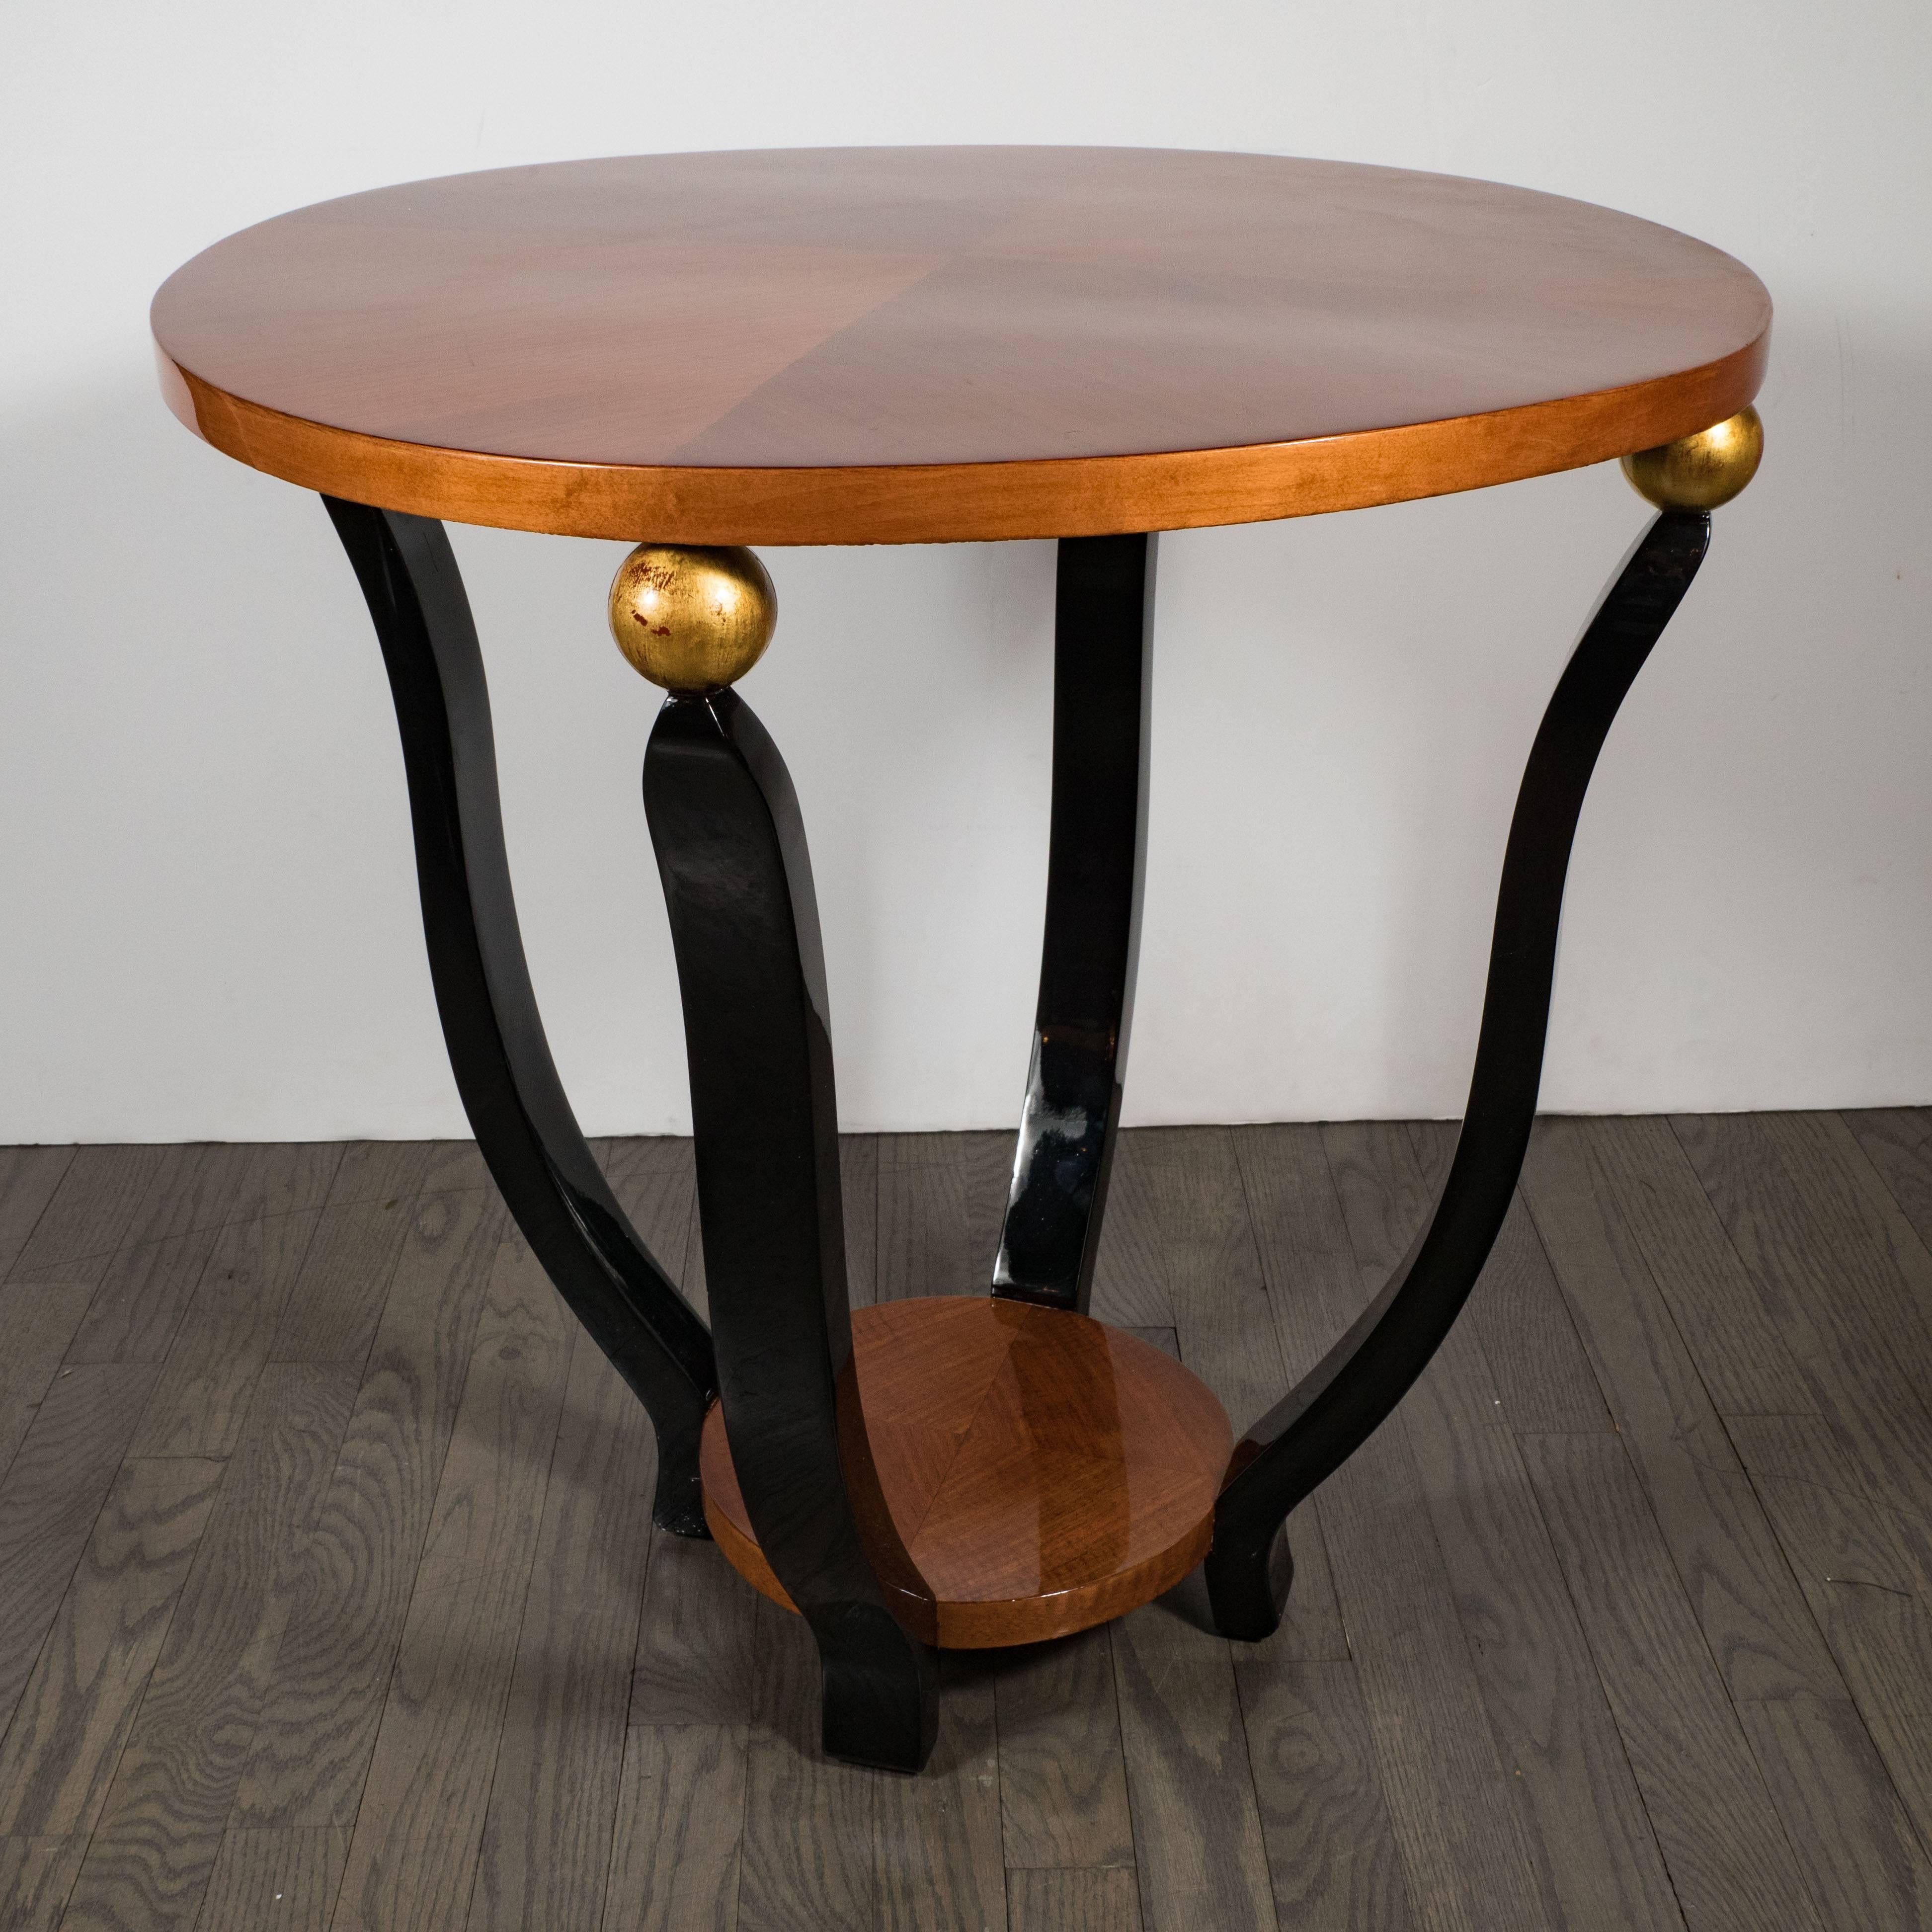 French Art Deco Two-Tier Gueridon Table in Bookmatched Walnut, Gold and Black Lacquer